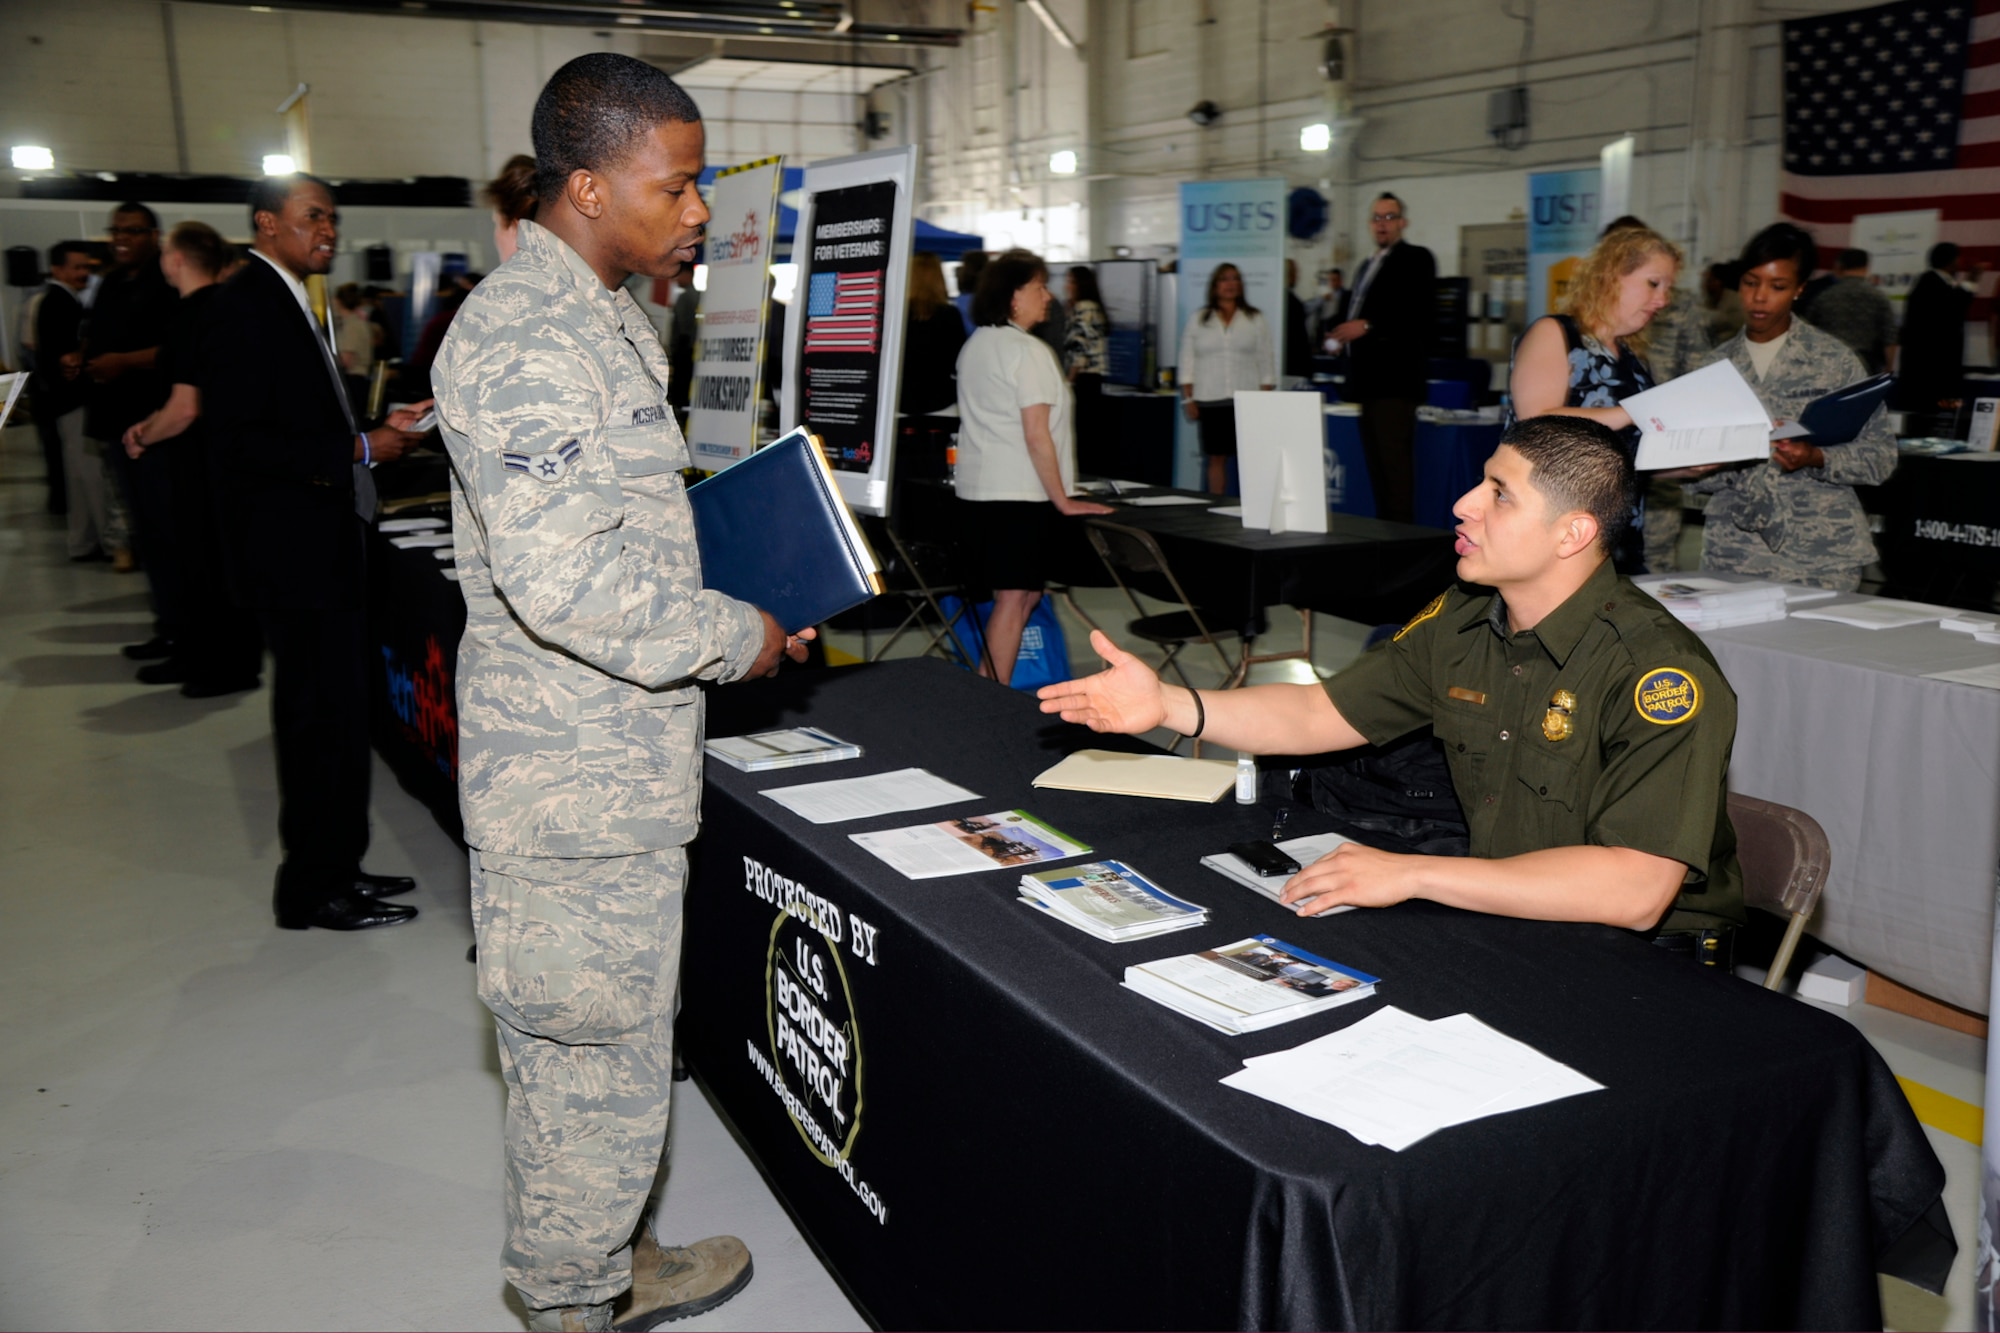 Airman 1st Class Onnie Mcspadden of the 127th Aircraft Metals Tech speaks with a representative of the U.S. Border Patrol during the Hiring Our Heroes job fair at Selfridge Air National Guard Base, Mich., May 18, 2013. Mcspadden, recently returned from his technical school, attended the job fair to explore possible career opportunities in law enforcement. More than 300 job seekers attended the fair at Selfridge, visiting with representatives from more than 53 employers. (U.S. Air National Guard photo by TSgt. David Kujawa